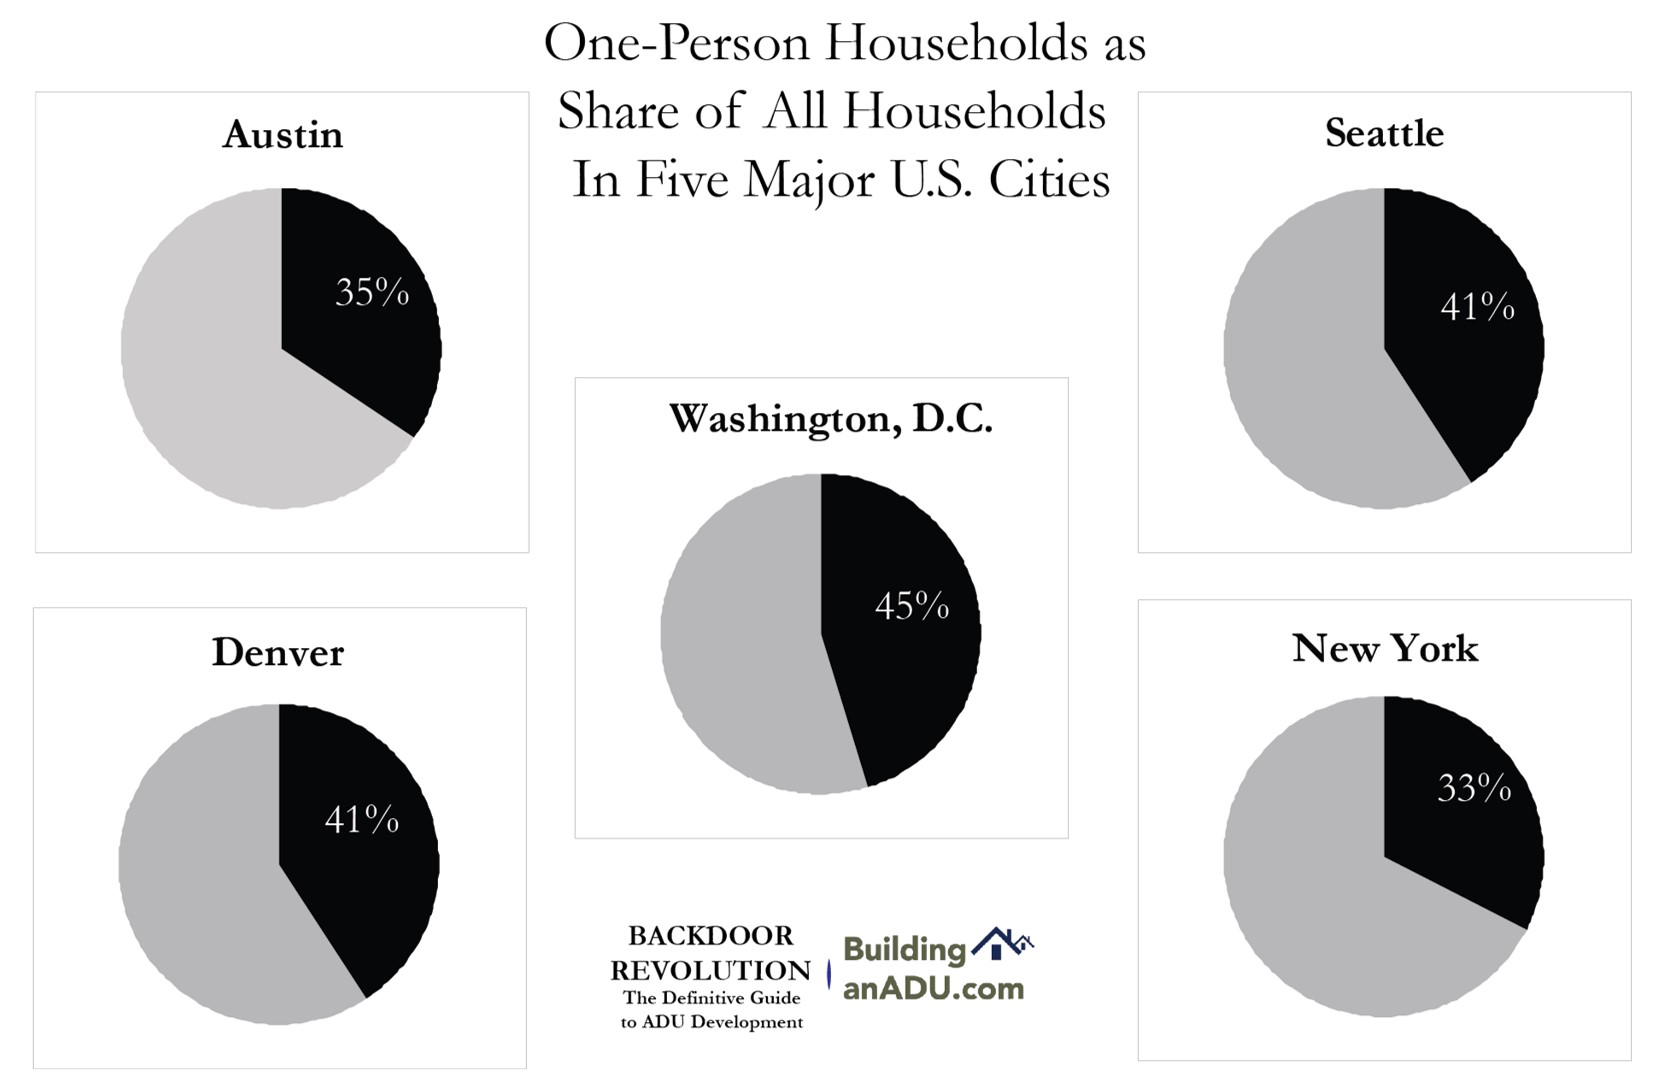  One person households are a growing portion of the households in urbanized areas. The black areas shown in the pie charts below represent the share of one-person households in each of these major US cities.&nbsp; 